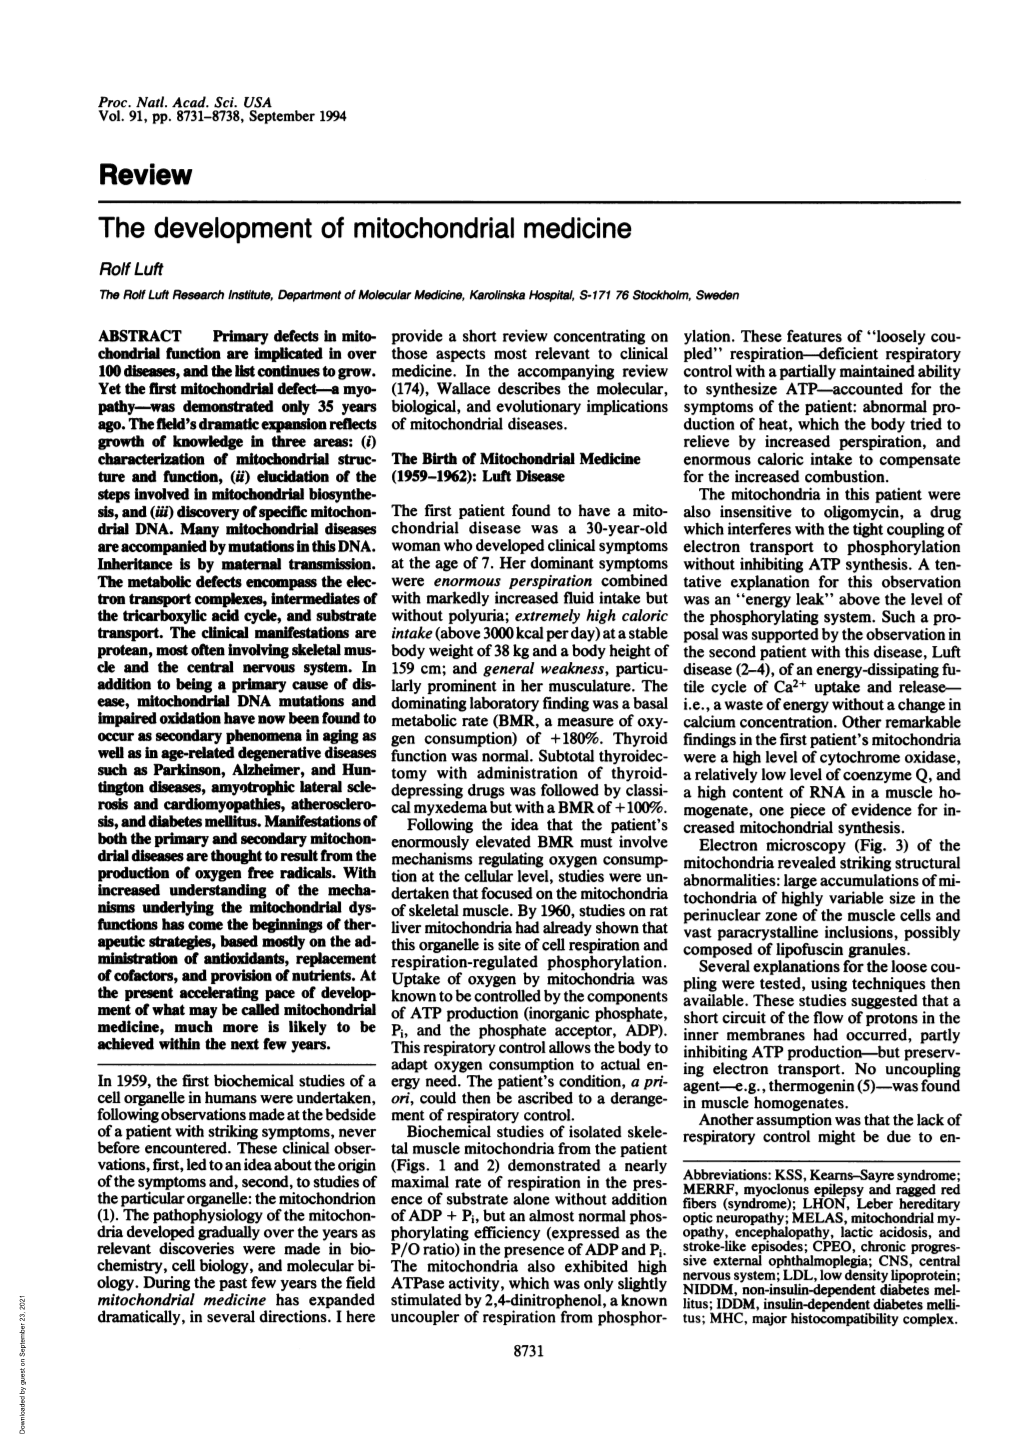 Review the Development of Mitochondrial Medicine